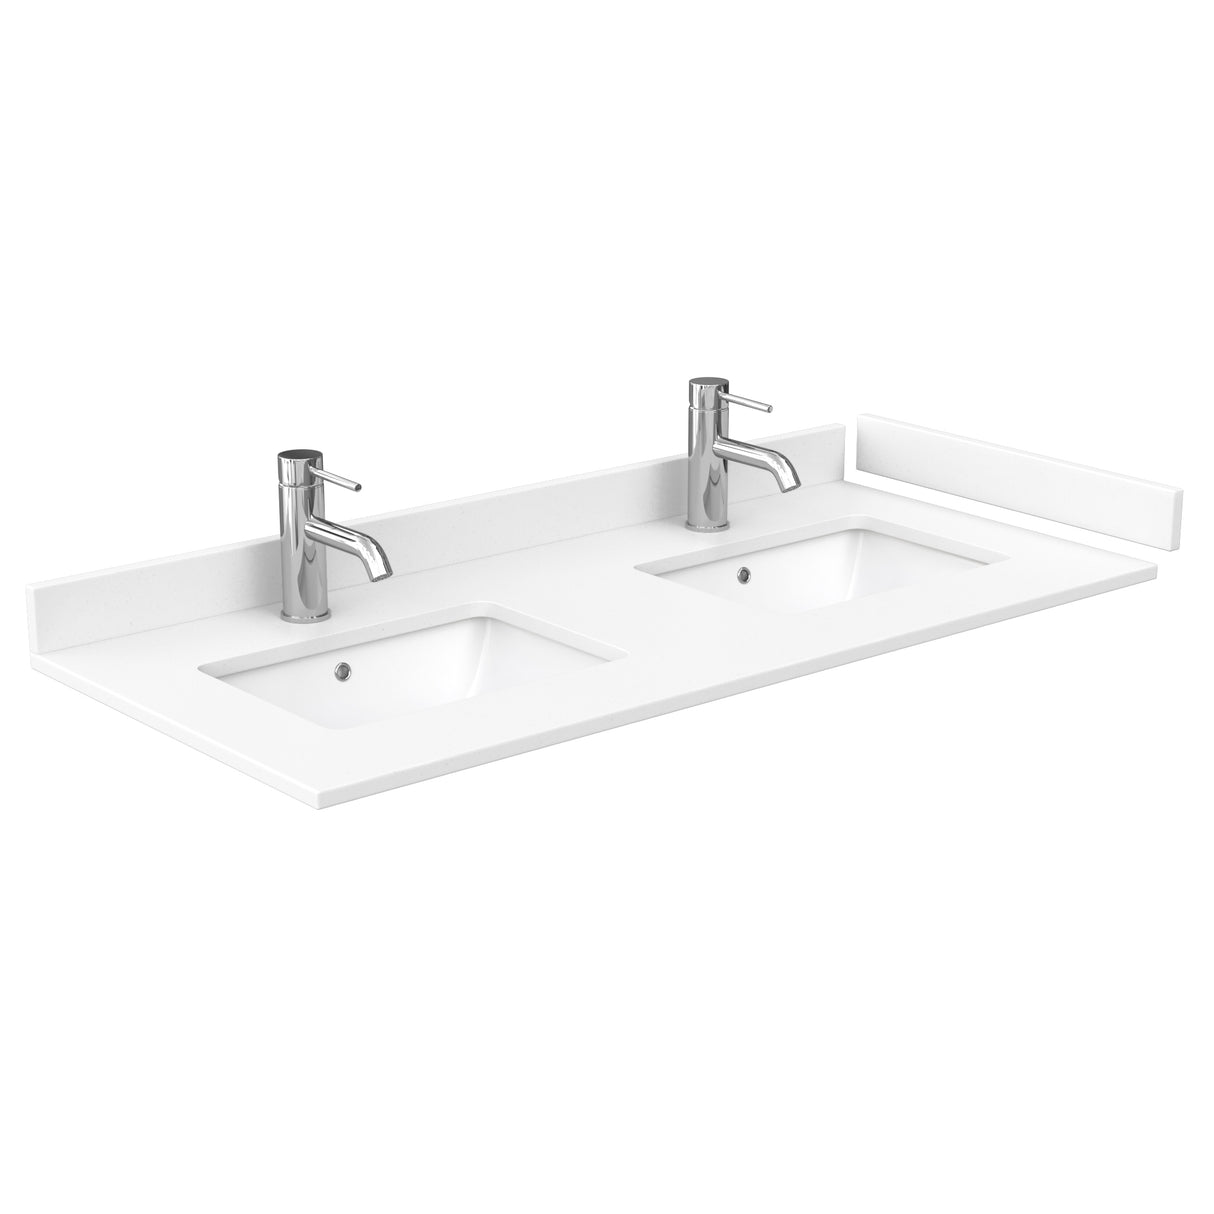 Avery 48 Inch Double Bathroom Vanity in White White Cultured Marble Countertop Undermount Square Sinks 46 Inch Mirror Brushed Gold Trim